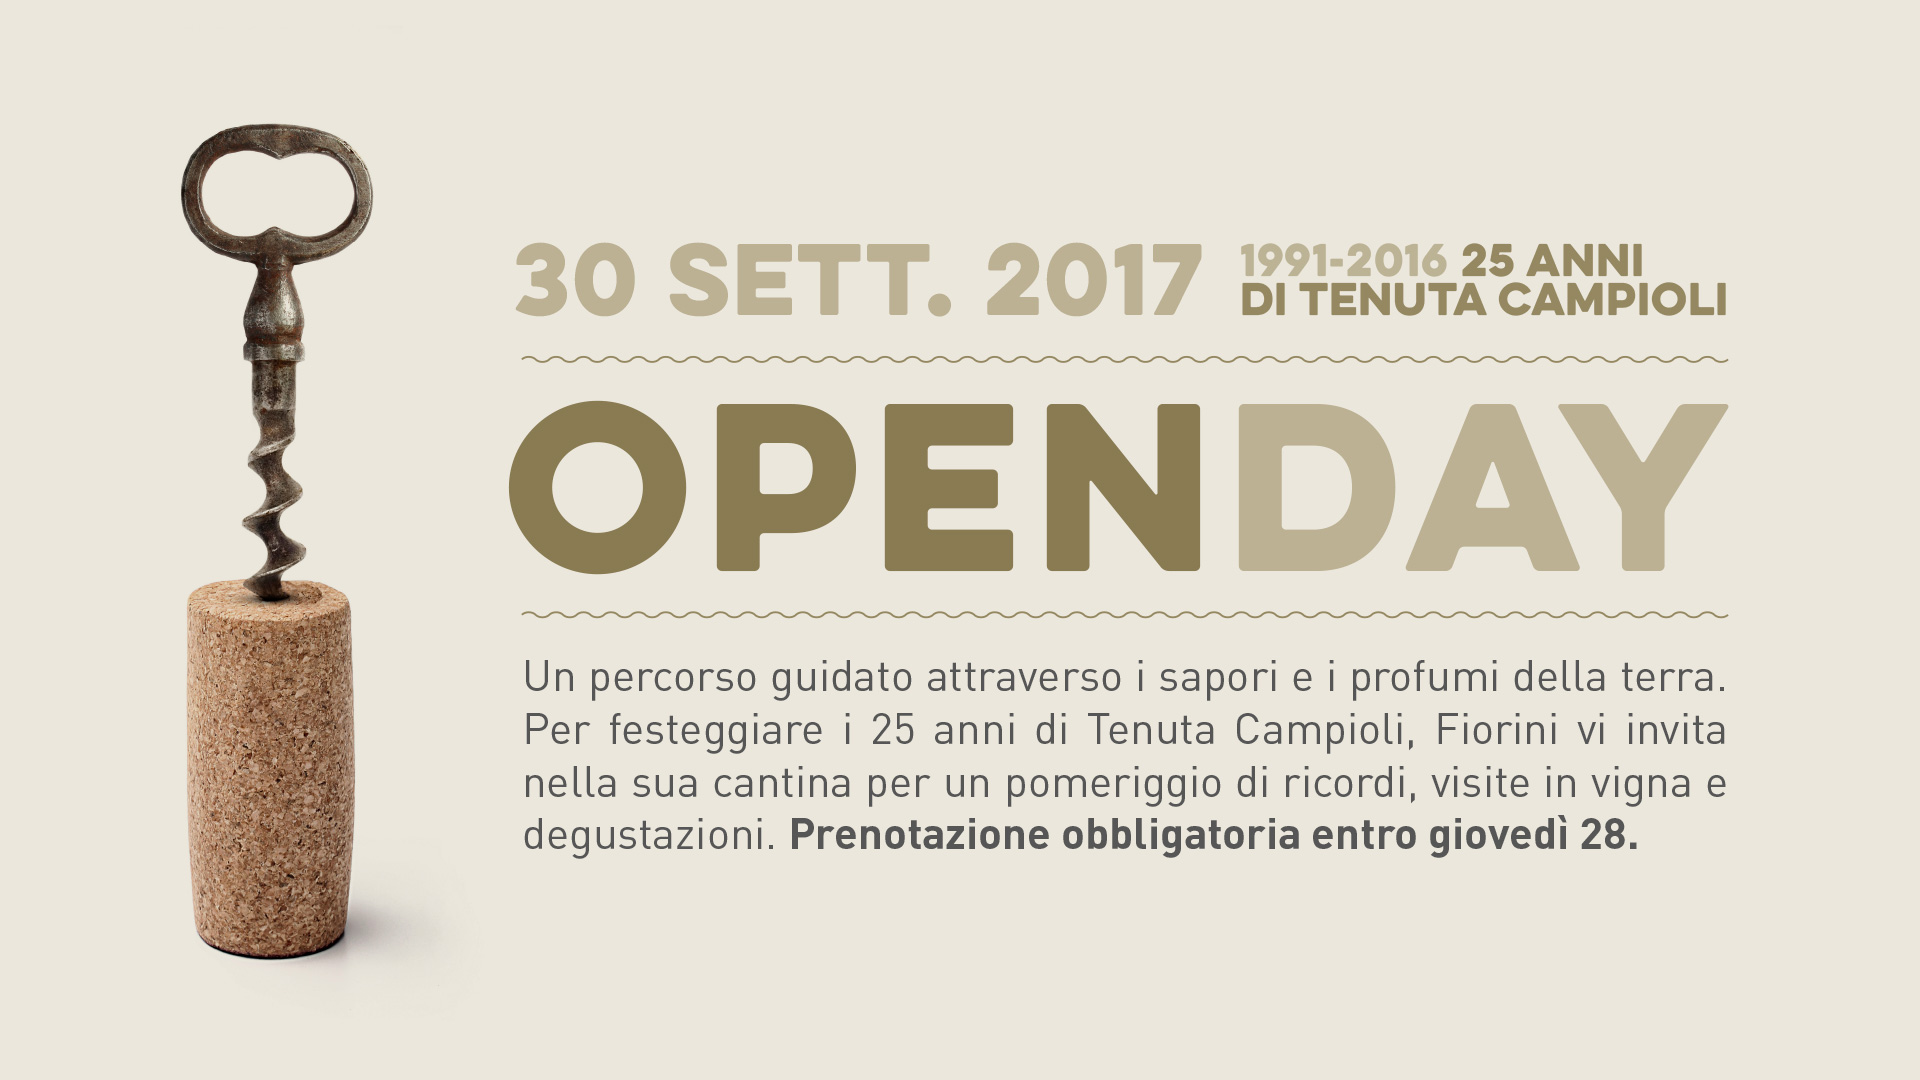 Openday 2017